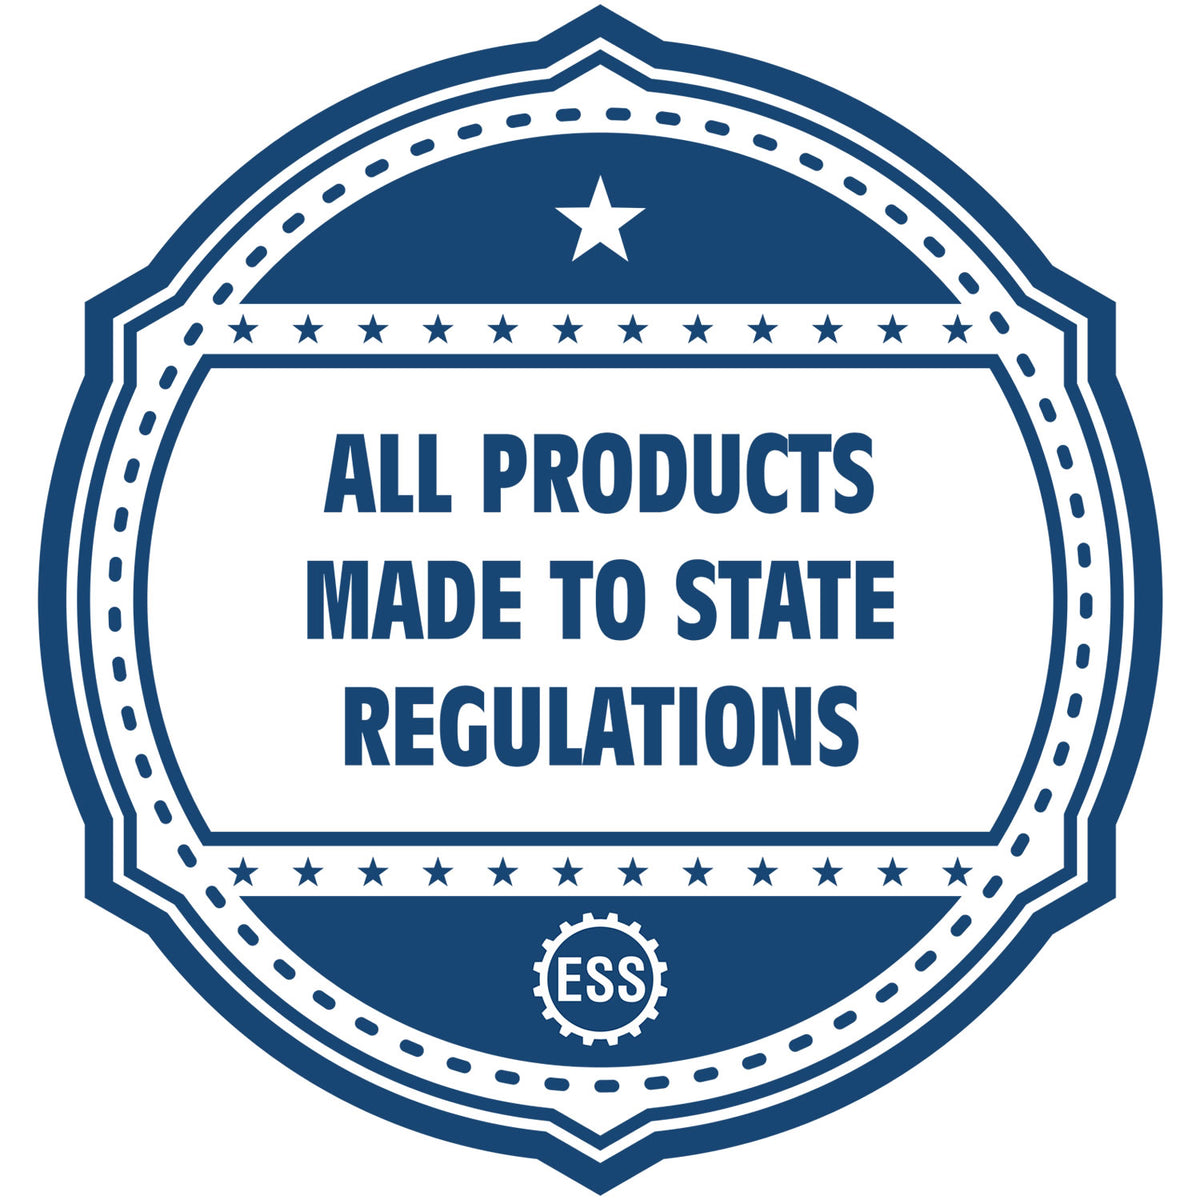 A blue icon or badge for the Hybrid Delaware Architect Seal showing that this product is made in compliance with state regulations.